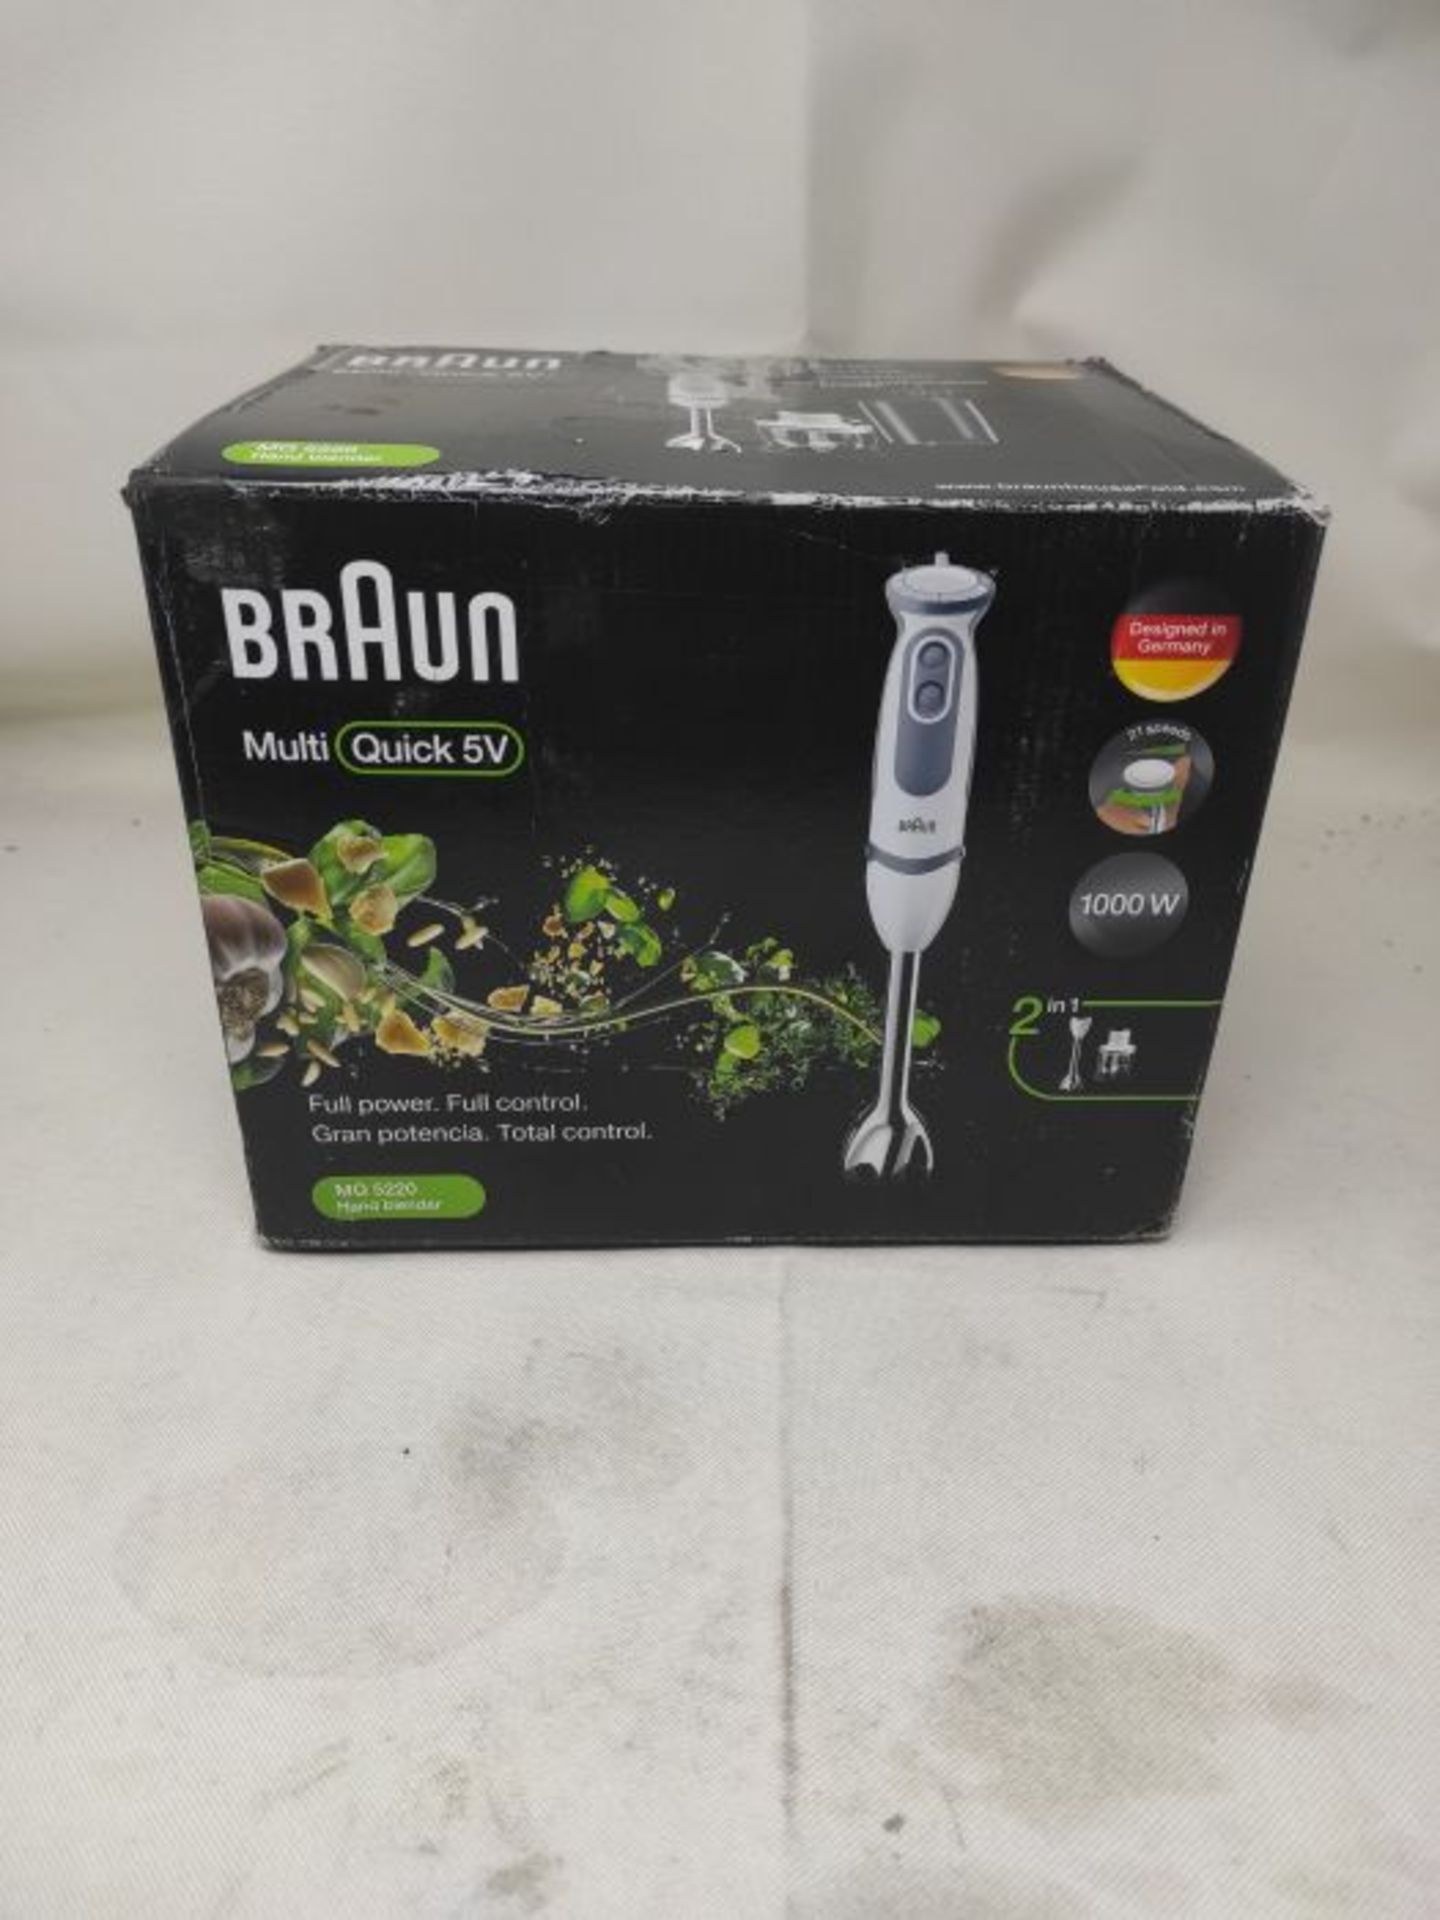 [INCOMPLETE] Braun MultiQuick 5 MQ 5207 WH Immersion blender Grey,White 1000 W - Image 2 of 3